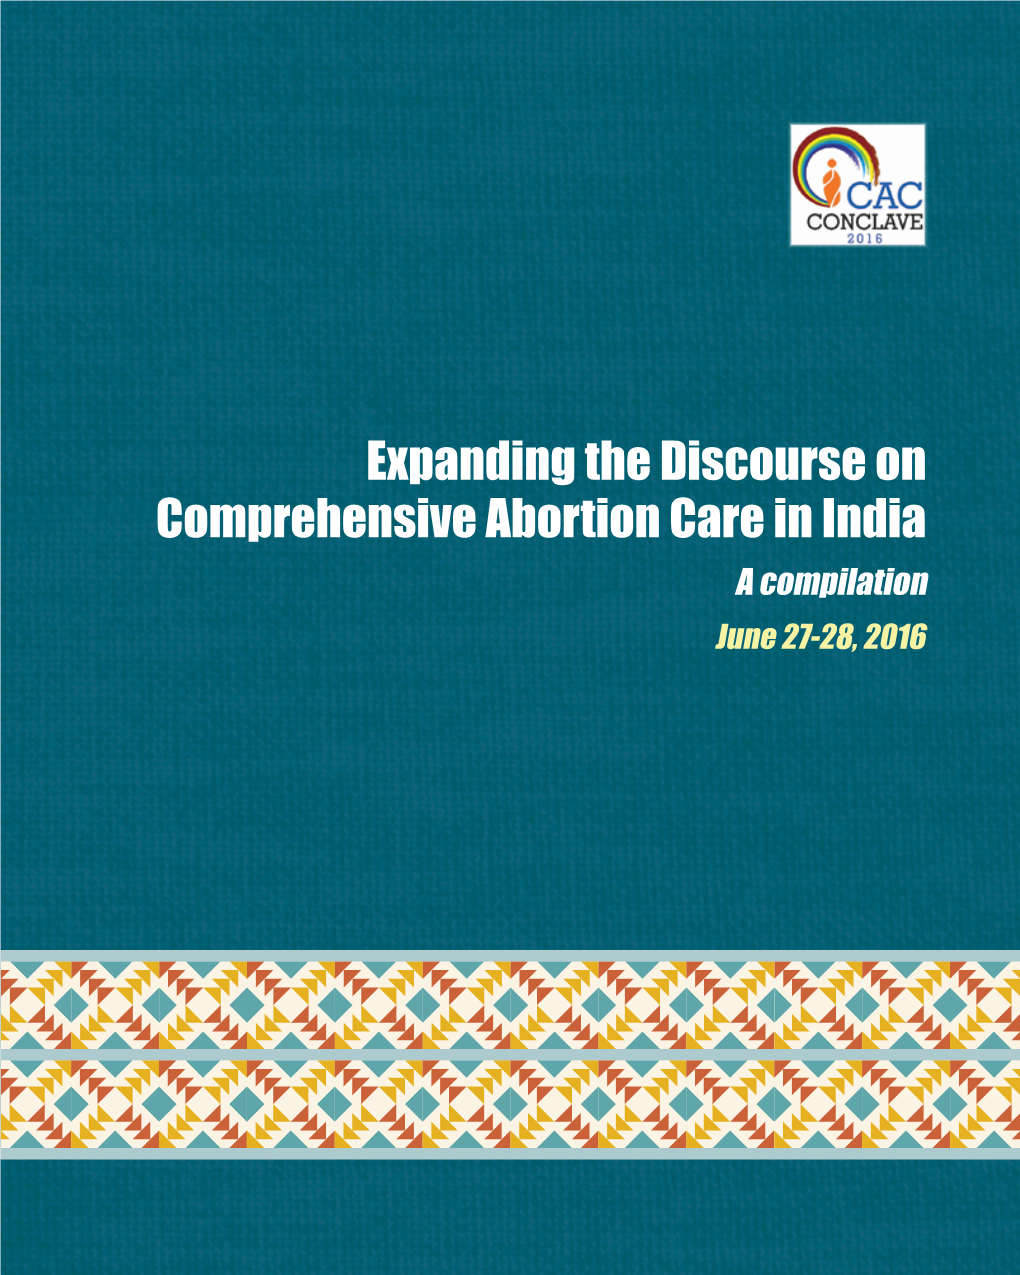 Expanding the Discourse on Comprehensive Abortion Care in India a Compilation June 27-28, 2016